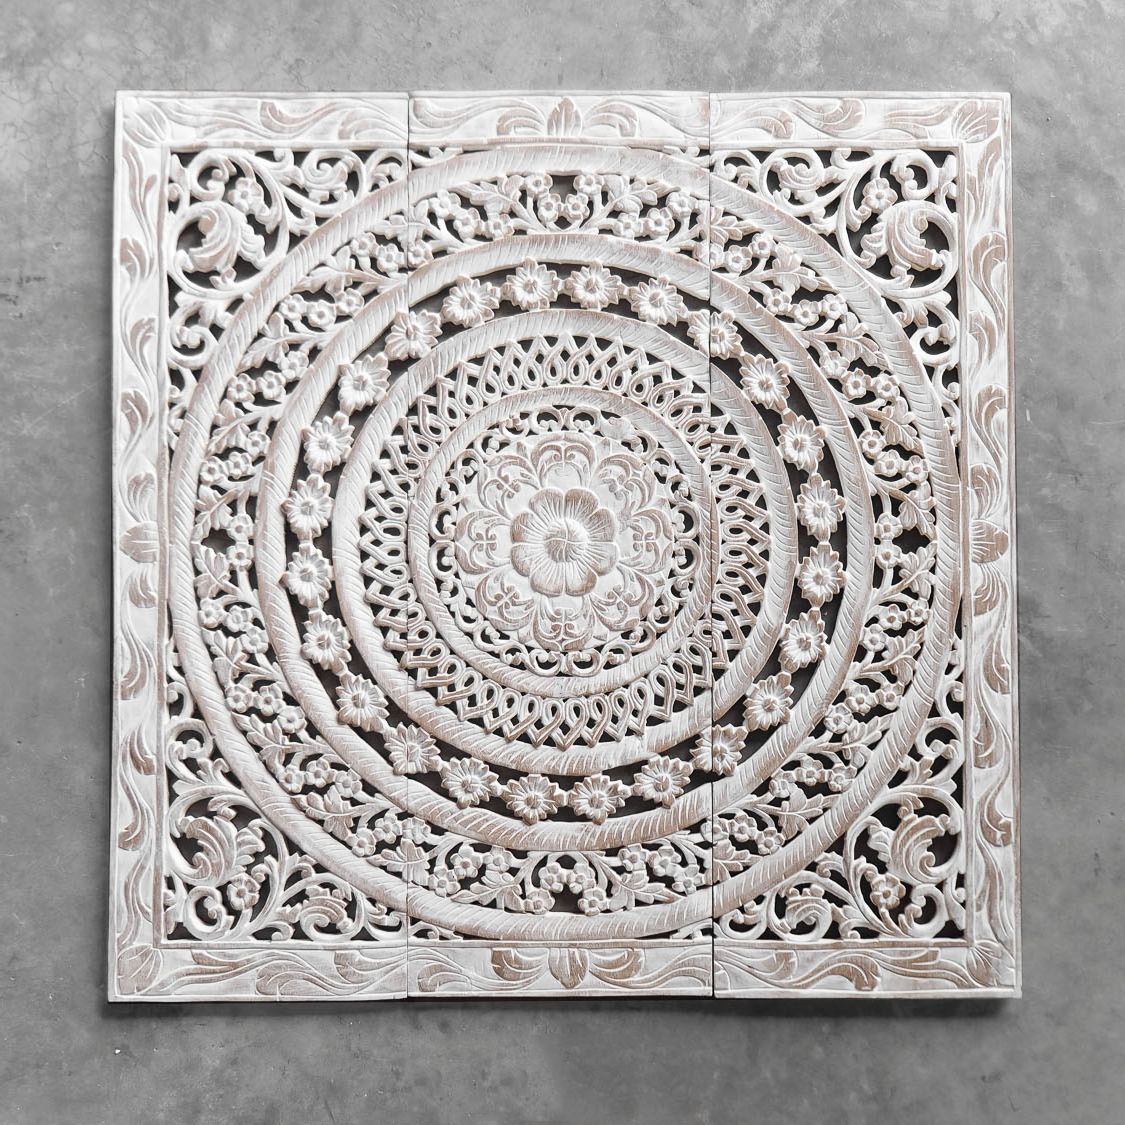 Moroccan Decent Wood Carving Wall Art Hanging Pertaining To Popular Filigree Screen Wall Art (View 11 of 15)